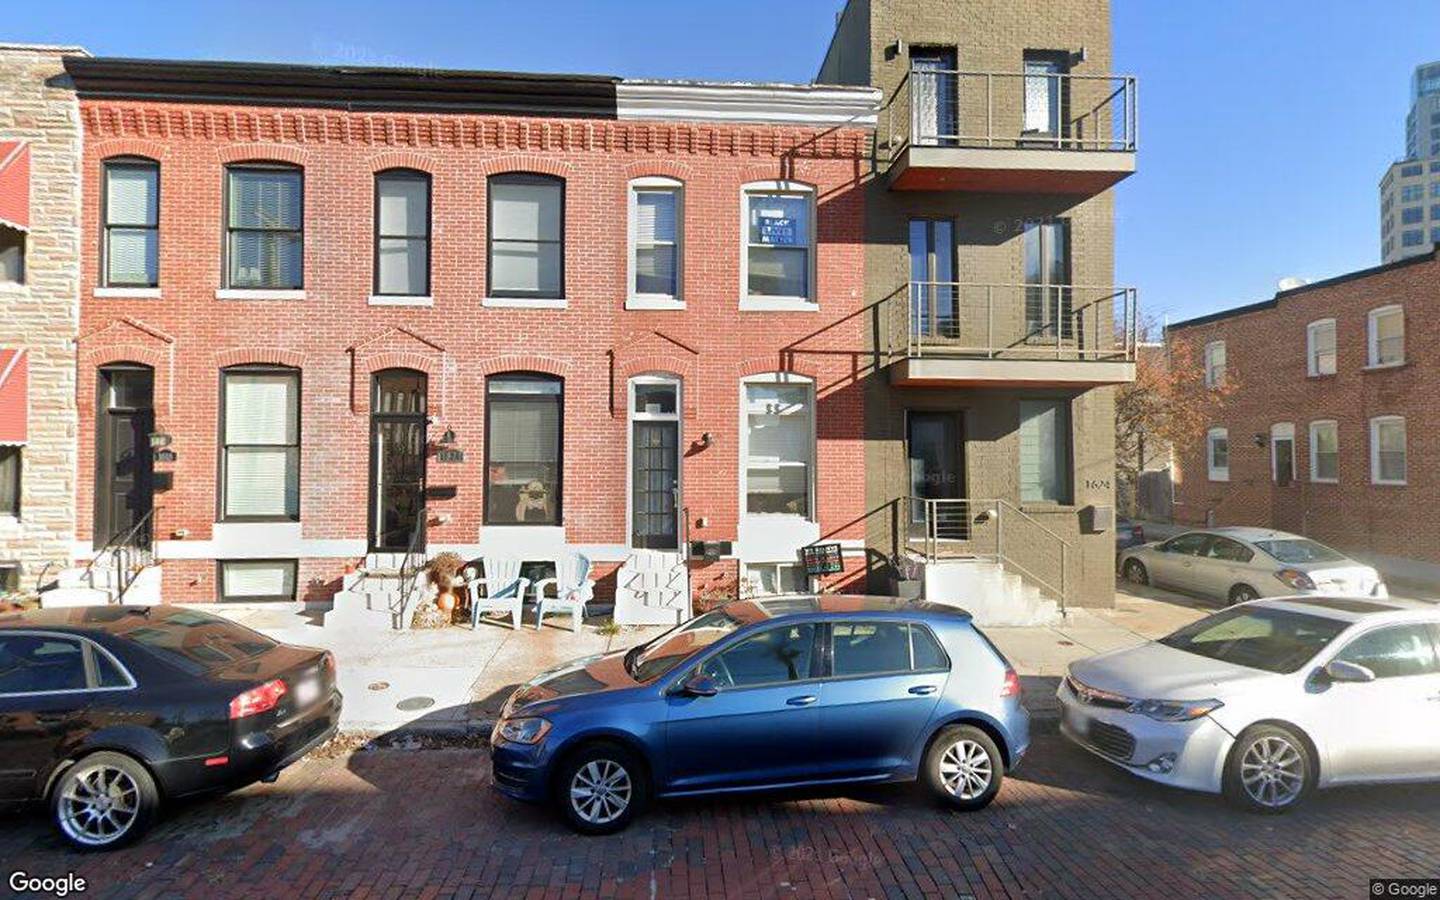 $632,000, townhouse at 1624 Clement Street 